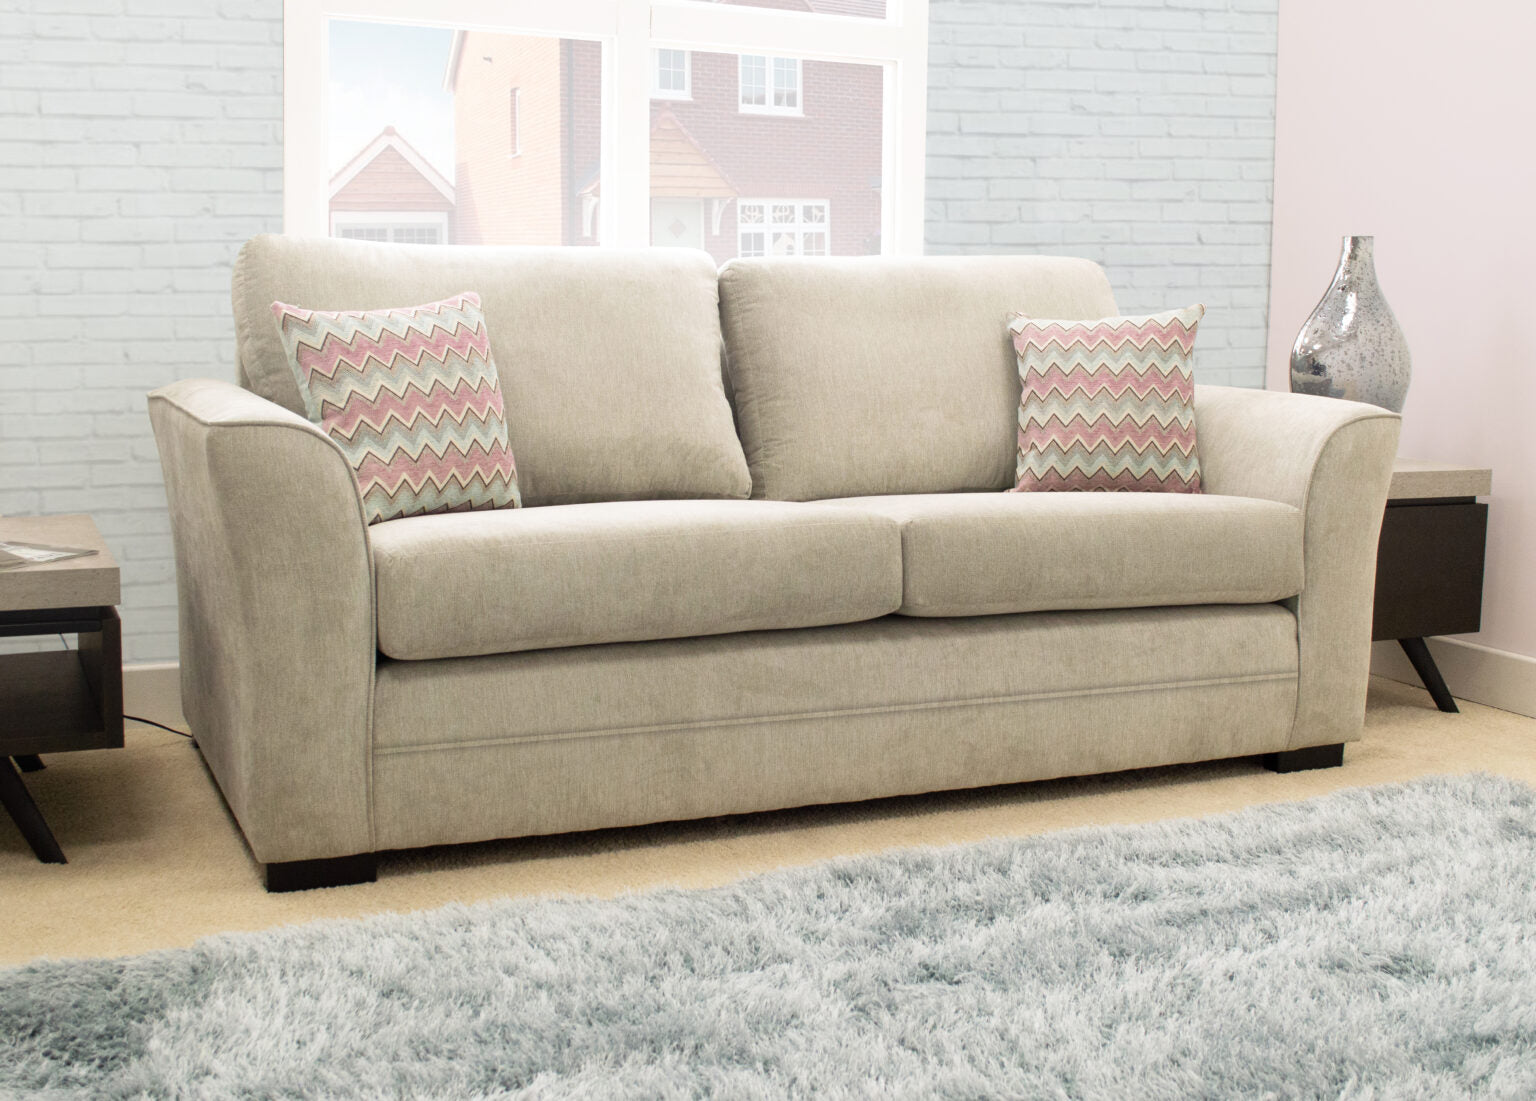 Allonby 2 Seater Fabric Sofa Bed - Made For You